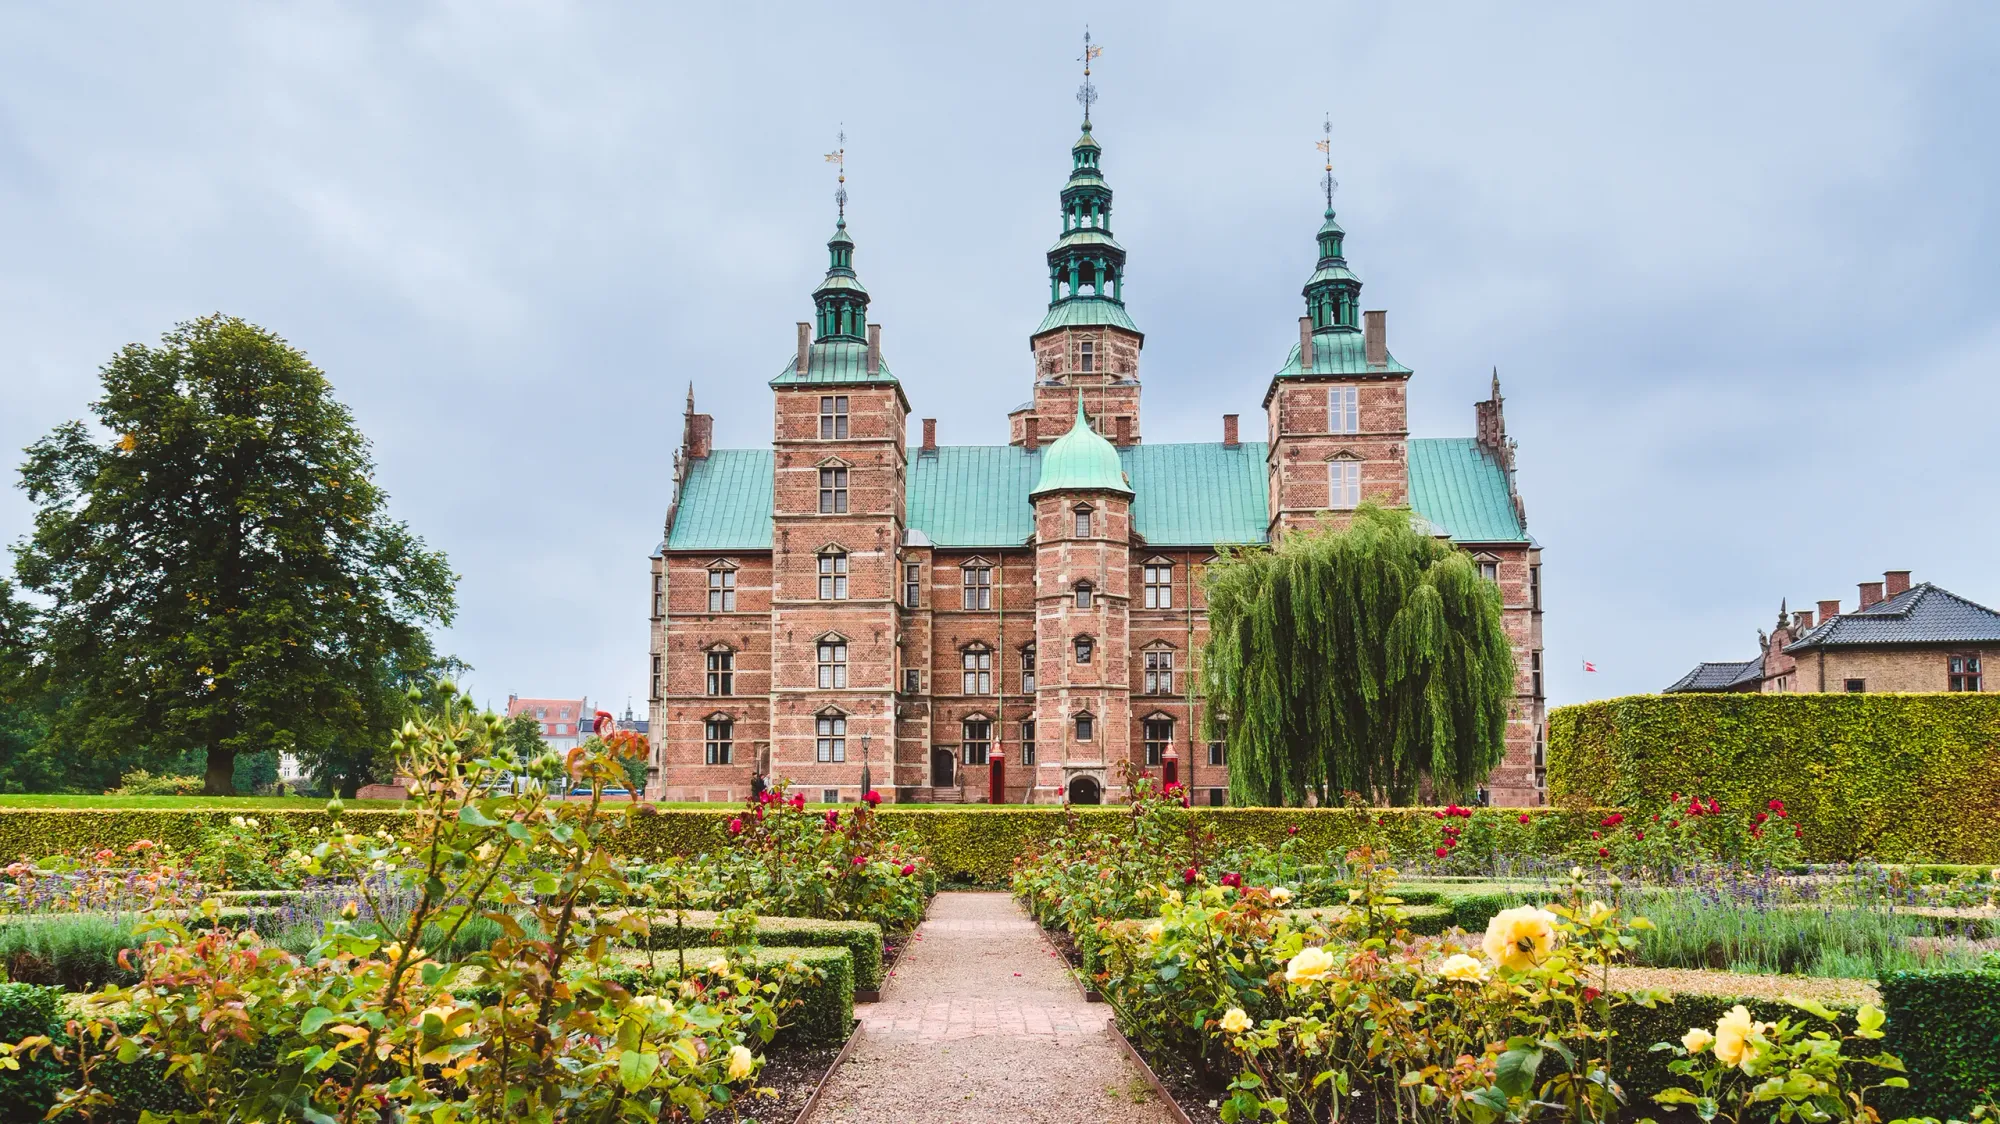 Discover Copenhagen Together: Top Attractions to Visit with your Roommates